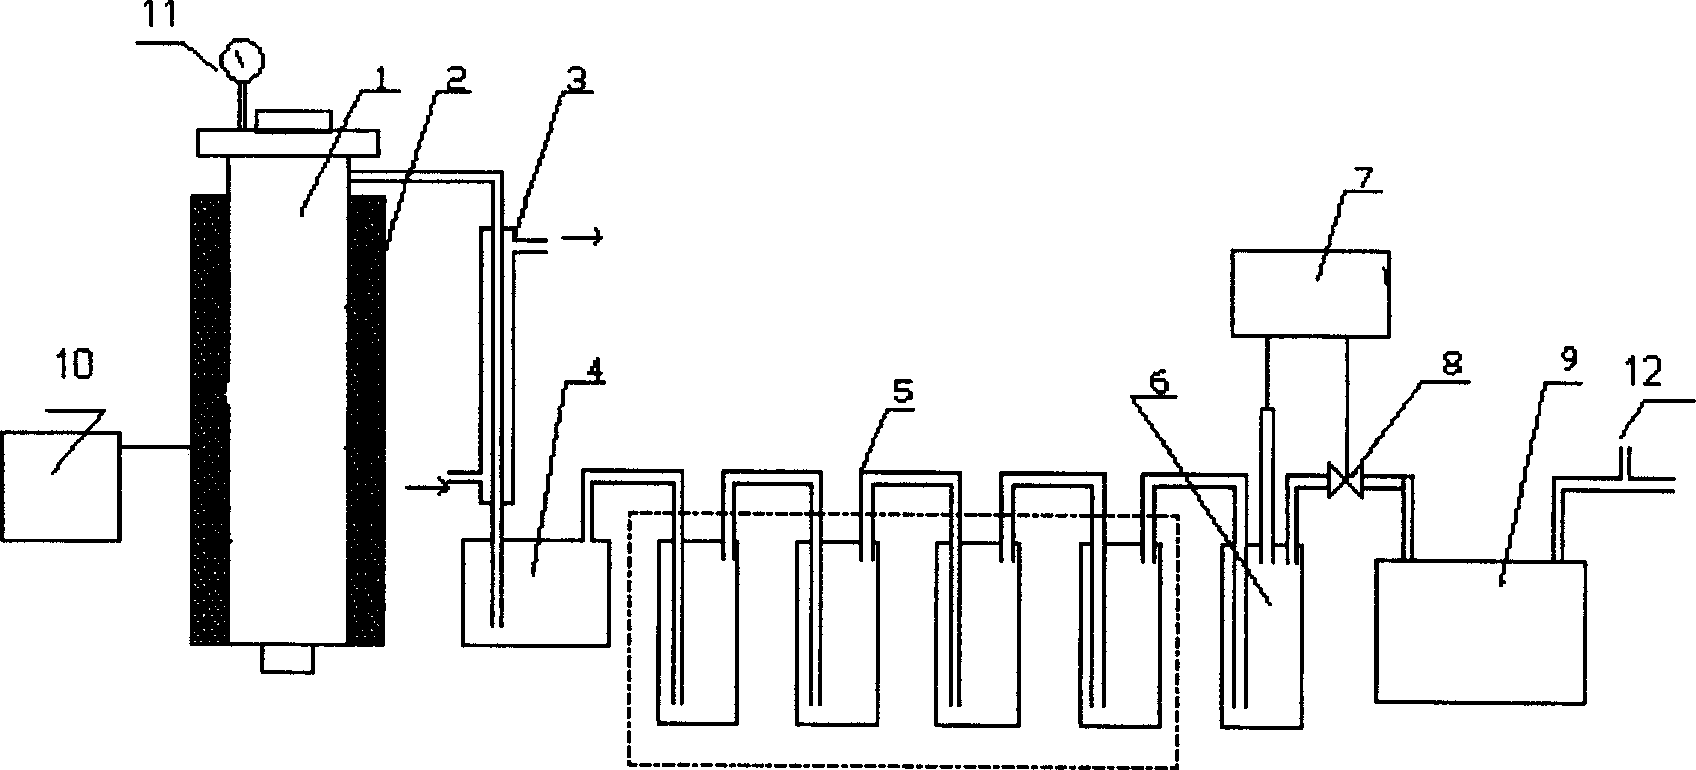 Method and equipment of vacuum catalytic cracking for preparing limonene, fuel oil and carbon black from scrap tire